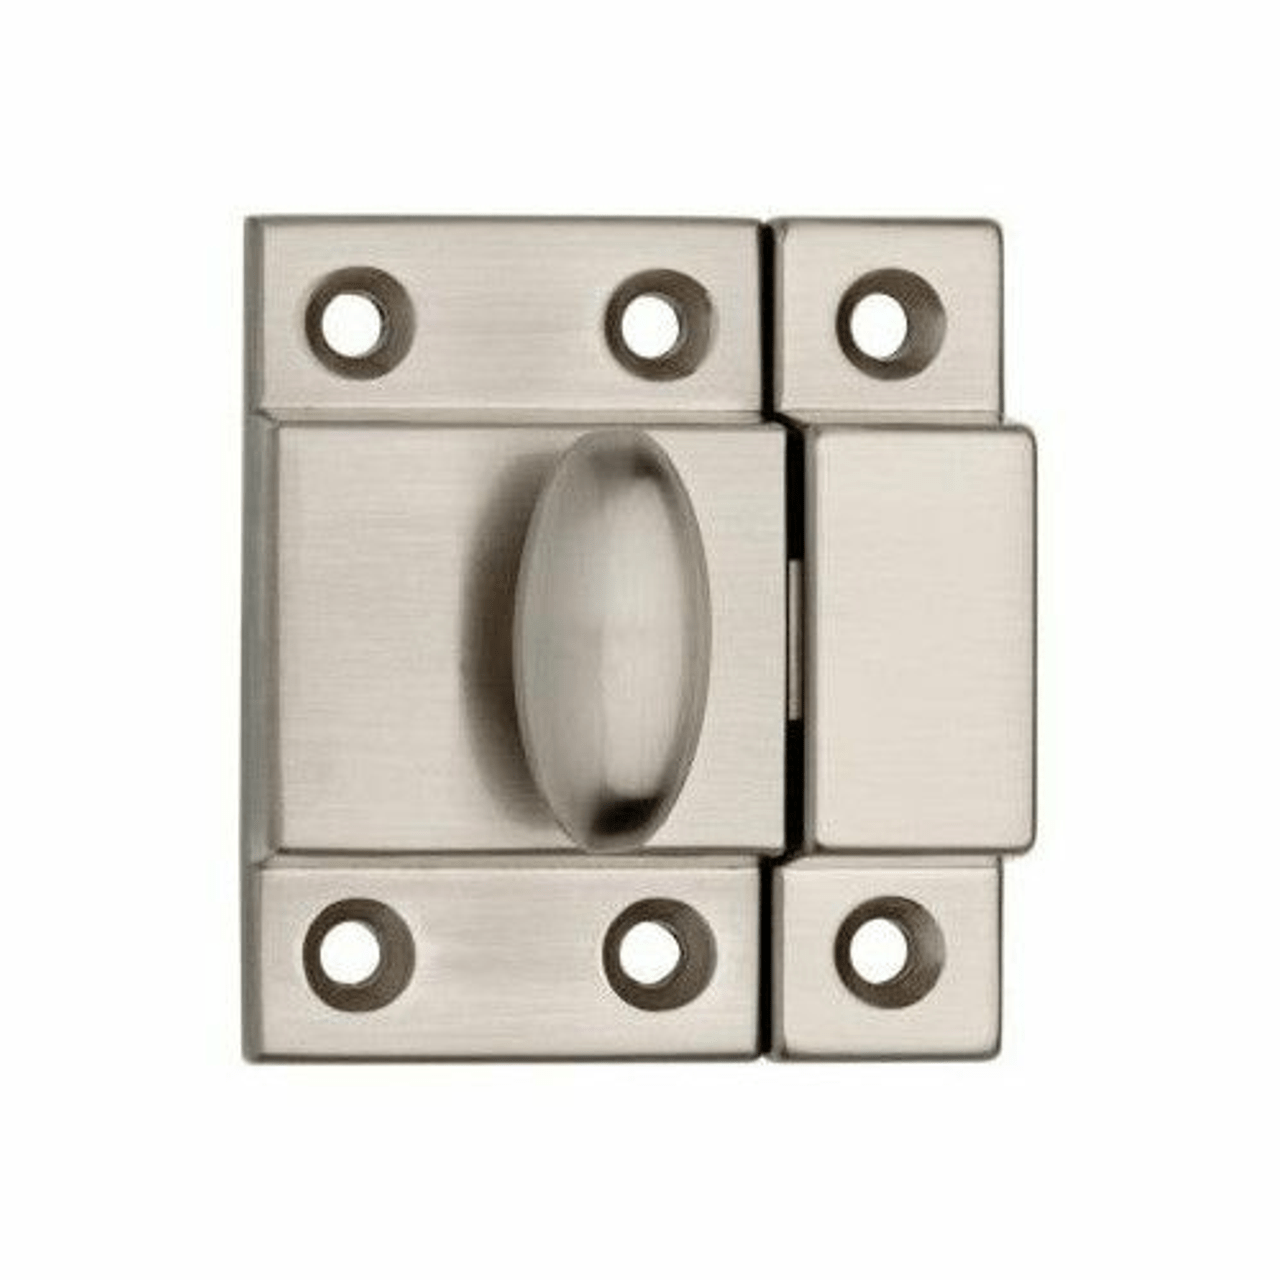 1-3/8 Box Hook Latch - BAG OF 4 - Brass Plated C1478-1534BP4P - D. Lawless  Hardware